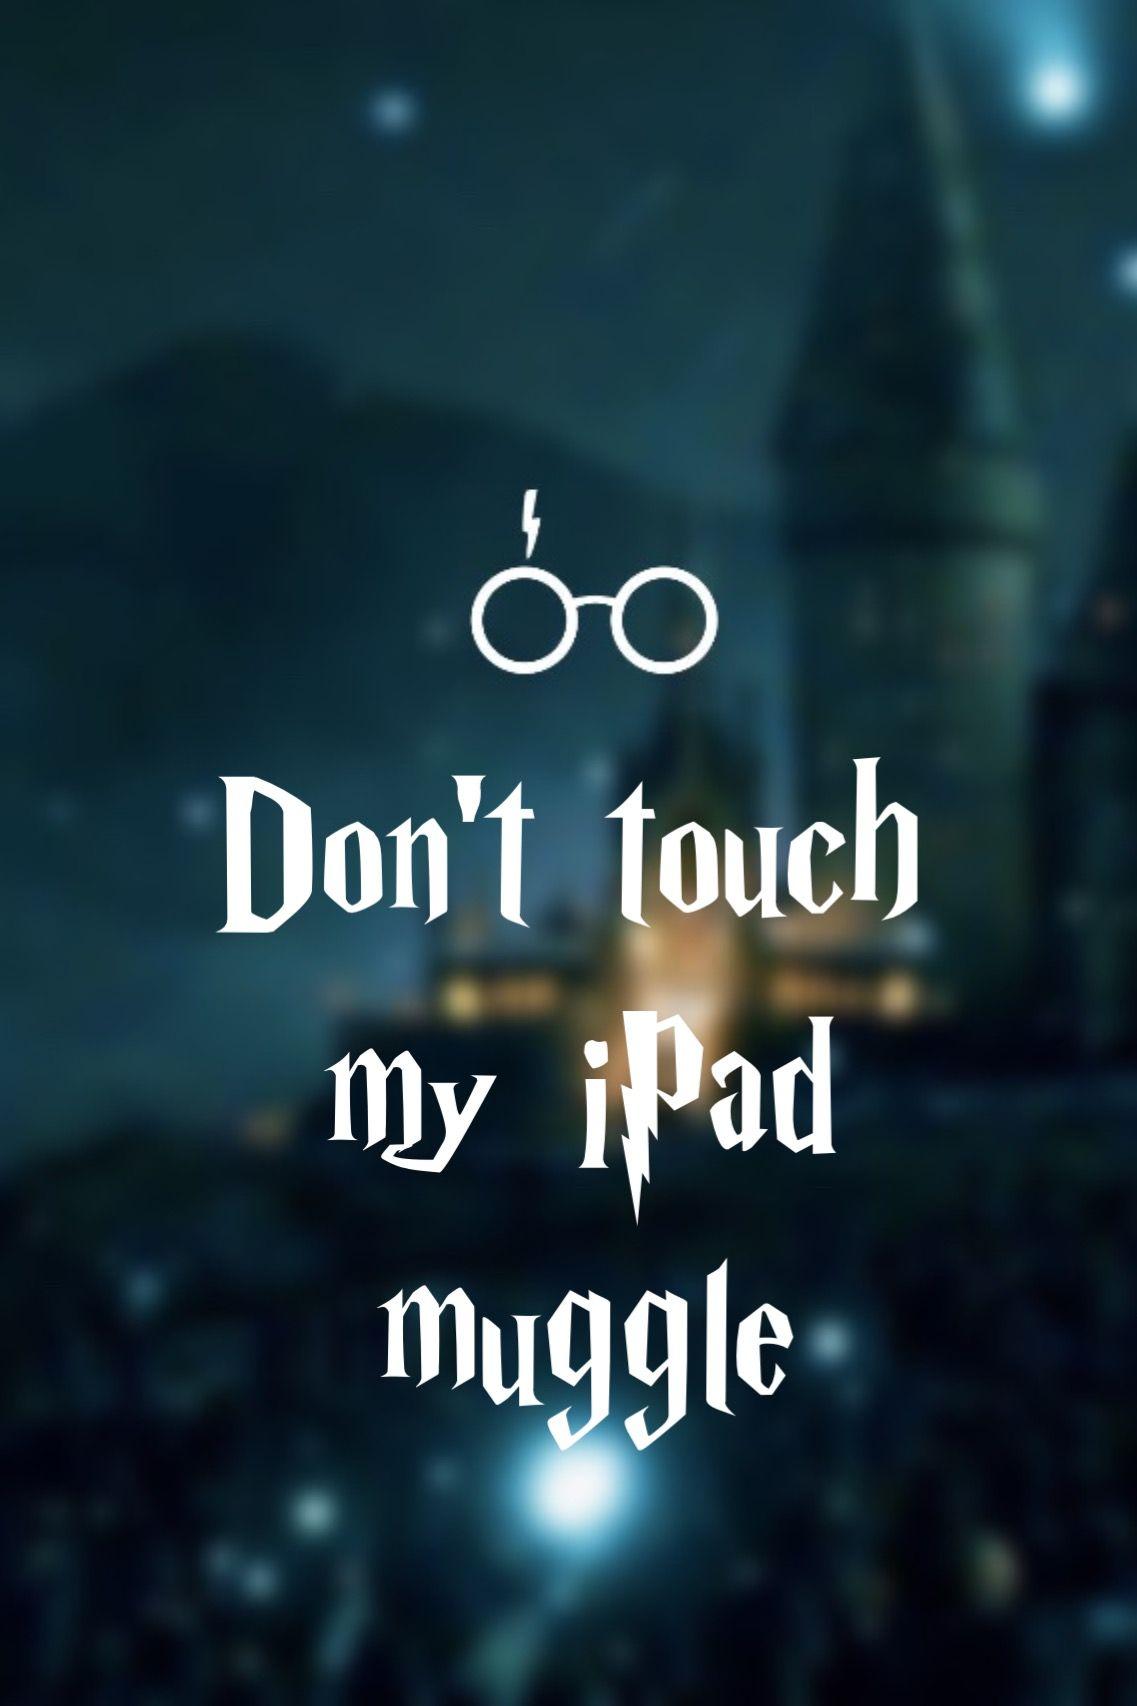 Don T Touch My Phone Muggle Wallpapers Wallpaper Cave Best wallpapers android dont touch my phone wallpapers star wallpaper. don t touch my phone muggle wallpapers